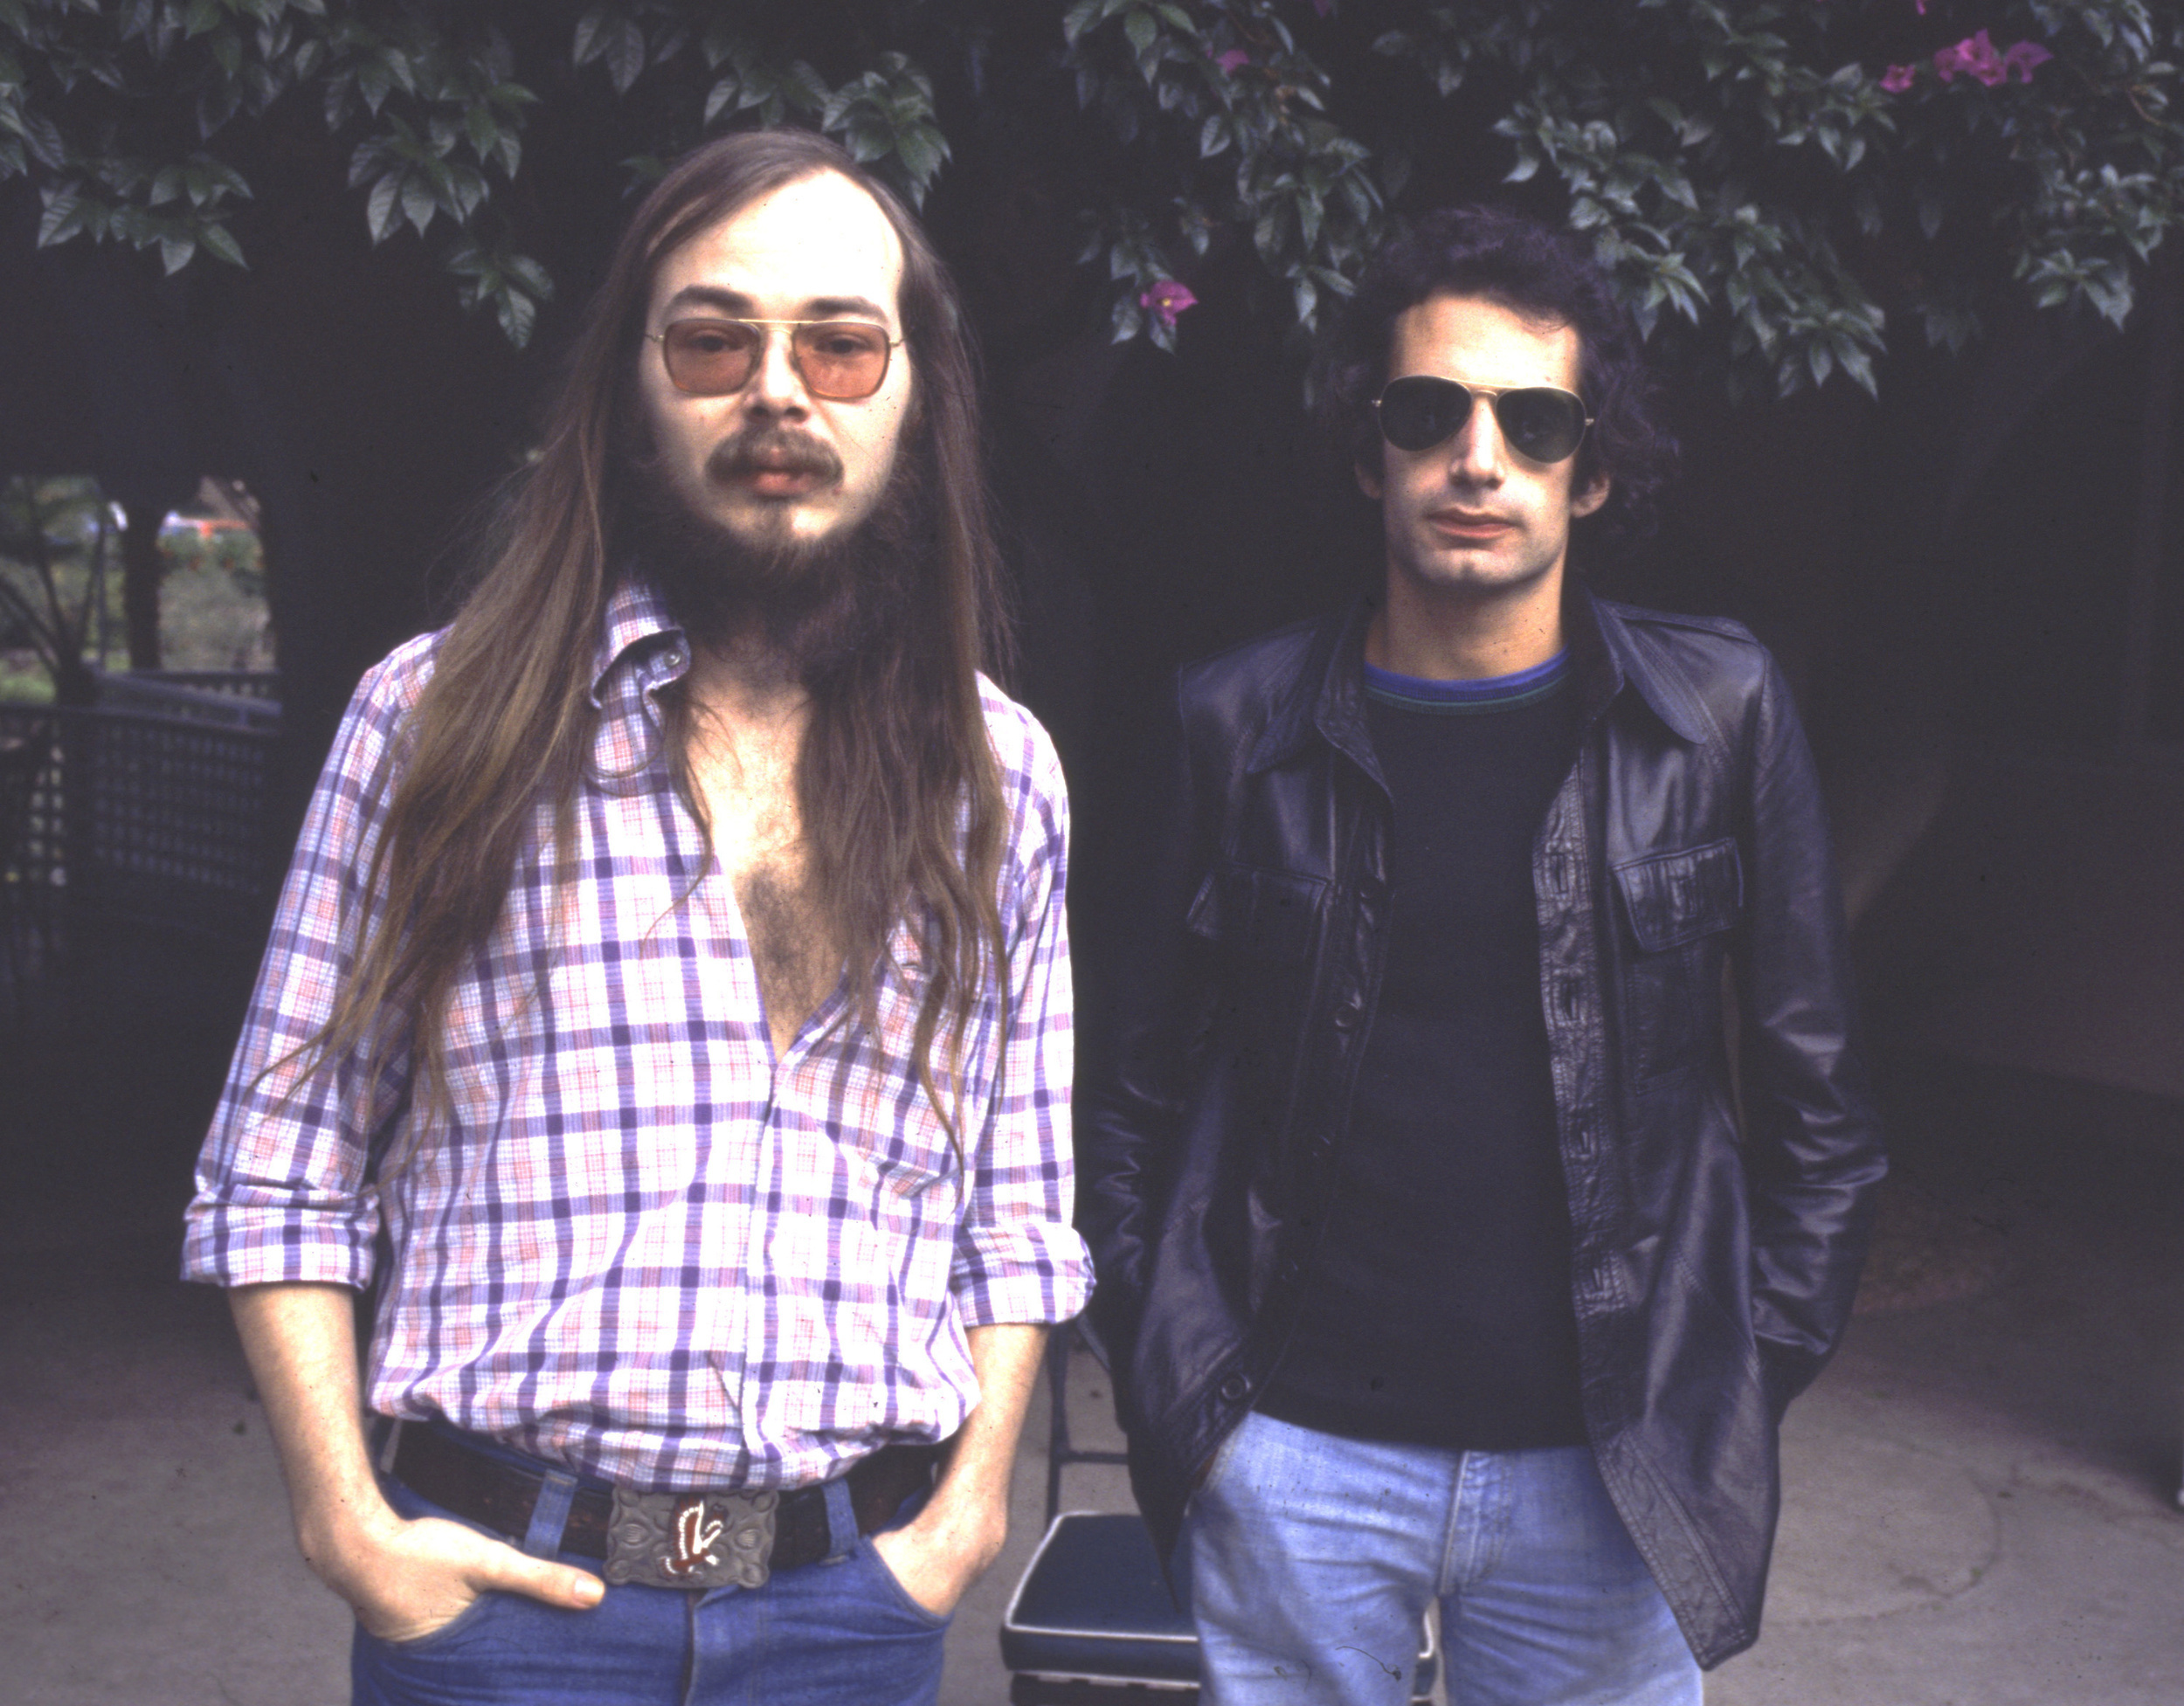 <p>Steely Dan was, in its prime, under the direction of celebrated songwriters Donald Fagan and Walter Becker, many things regarding a collective sound. Rock, pop, jazz, blues. Usually melodic, well within the soft-rock category. Songs like <a href="https://www.youtube.com/watch?v=LI7NDDQLvbo">"Peg,"</a> from the 1977 masterpiece <em>Aja</em>, certainly has a yacht rock vibe, too. Perhaps most notably is that the great Michael McDonald, longtime frontman of the Doobie Brothers and driving singer-songwriter in the soft/yacht rock circles, provides backing vocals on the track. </p><p>You may also like: <a href='https://www.yardbarker.com/entertainment/articles/the_best_canadian_rock_bands_of_all_time_112723/s1__39118394'>The best Canadian rock bands of all time</a></p>